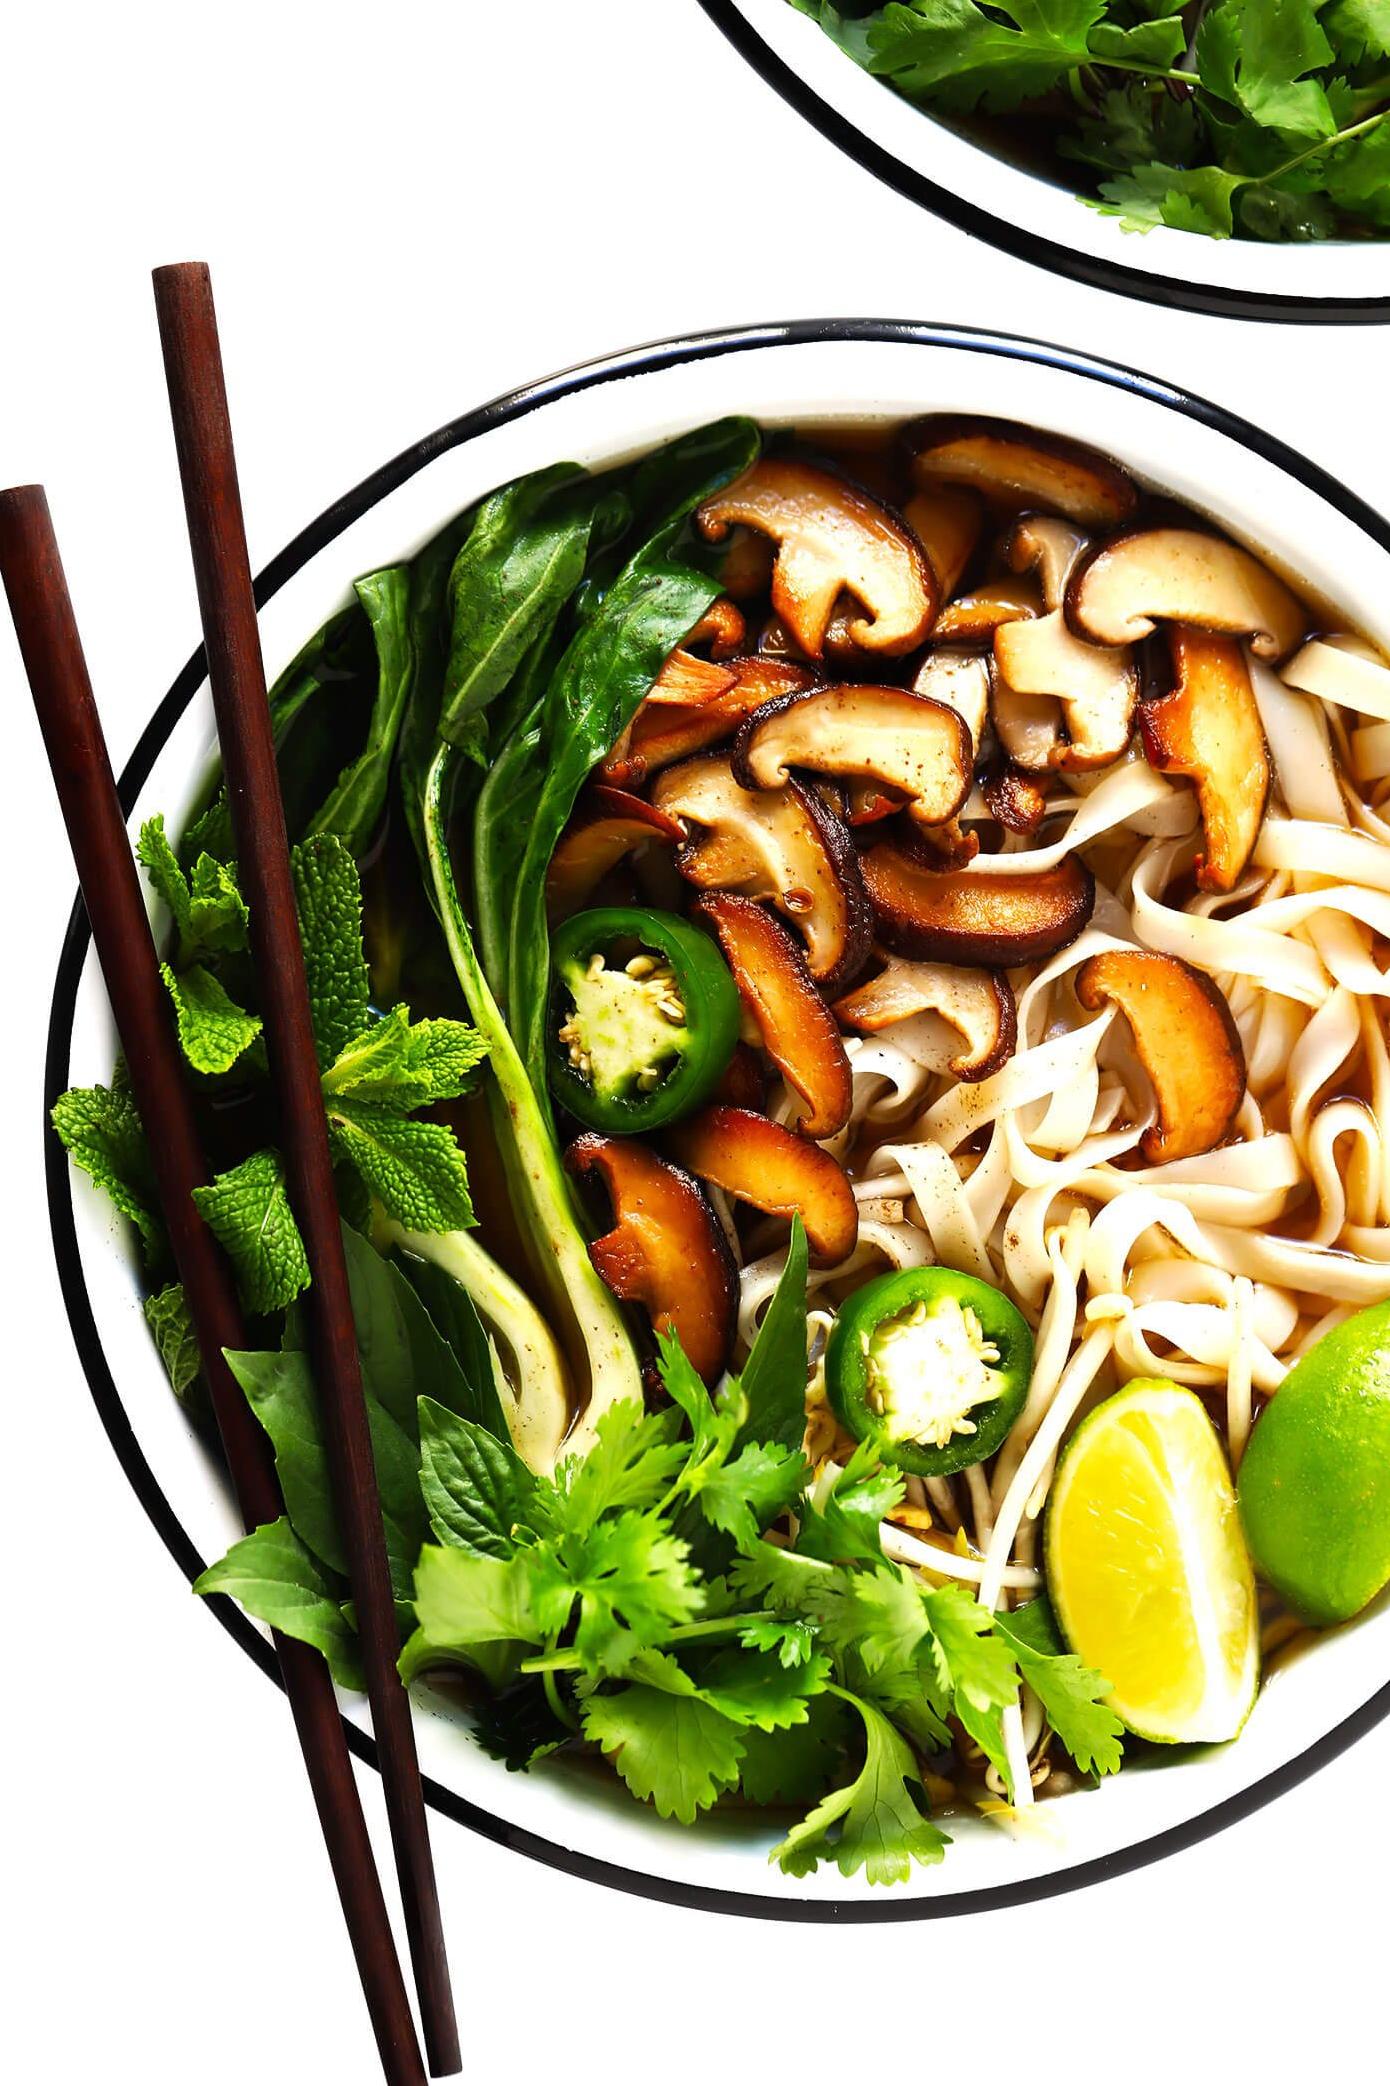  A piping hot bowl of vegetarian pho to warm your soul on a chilly day